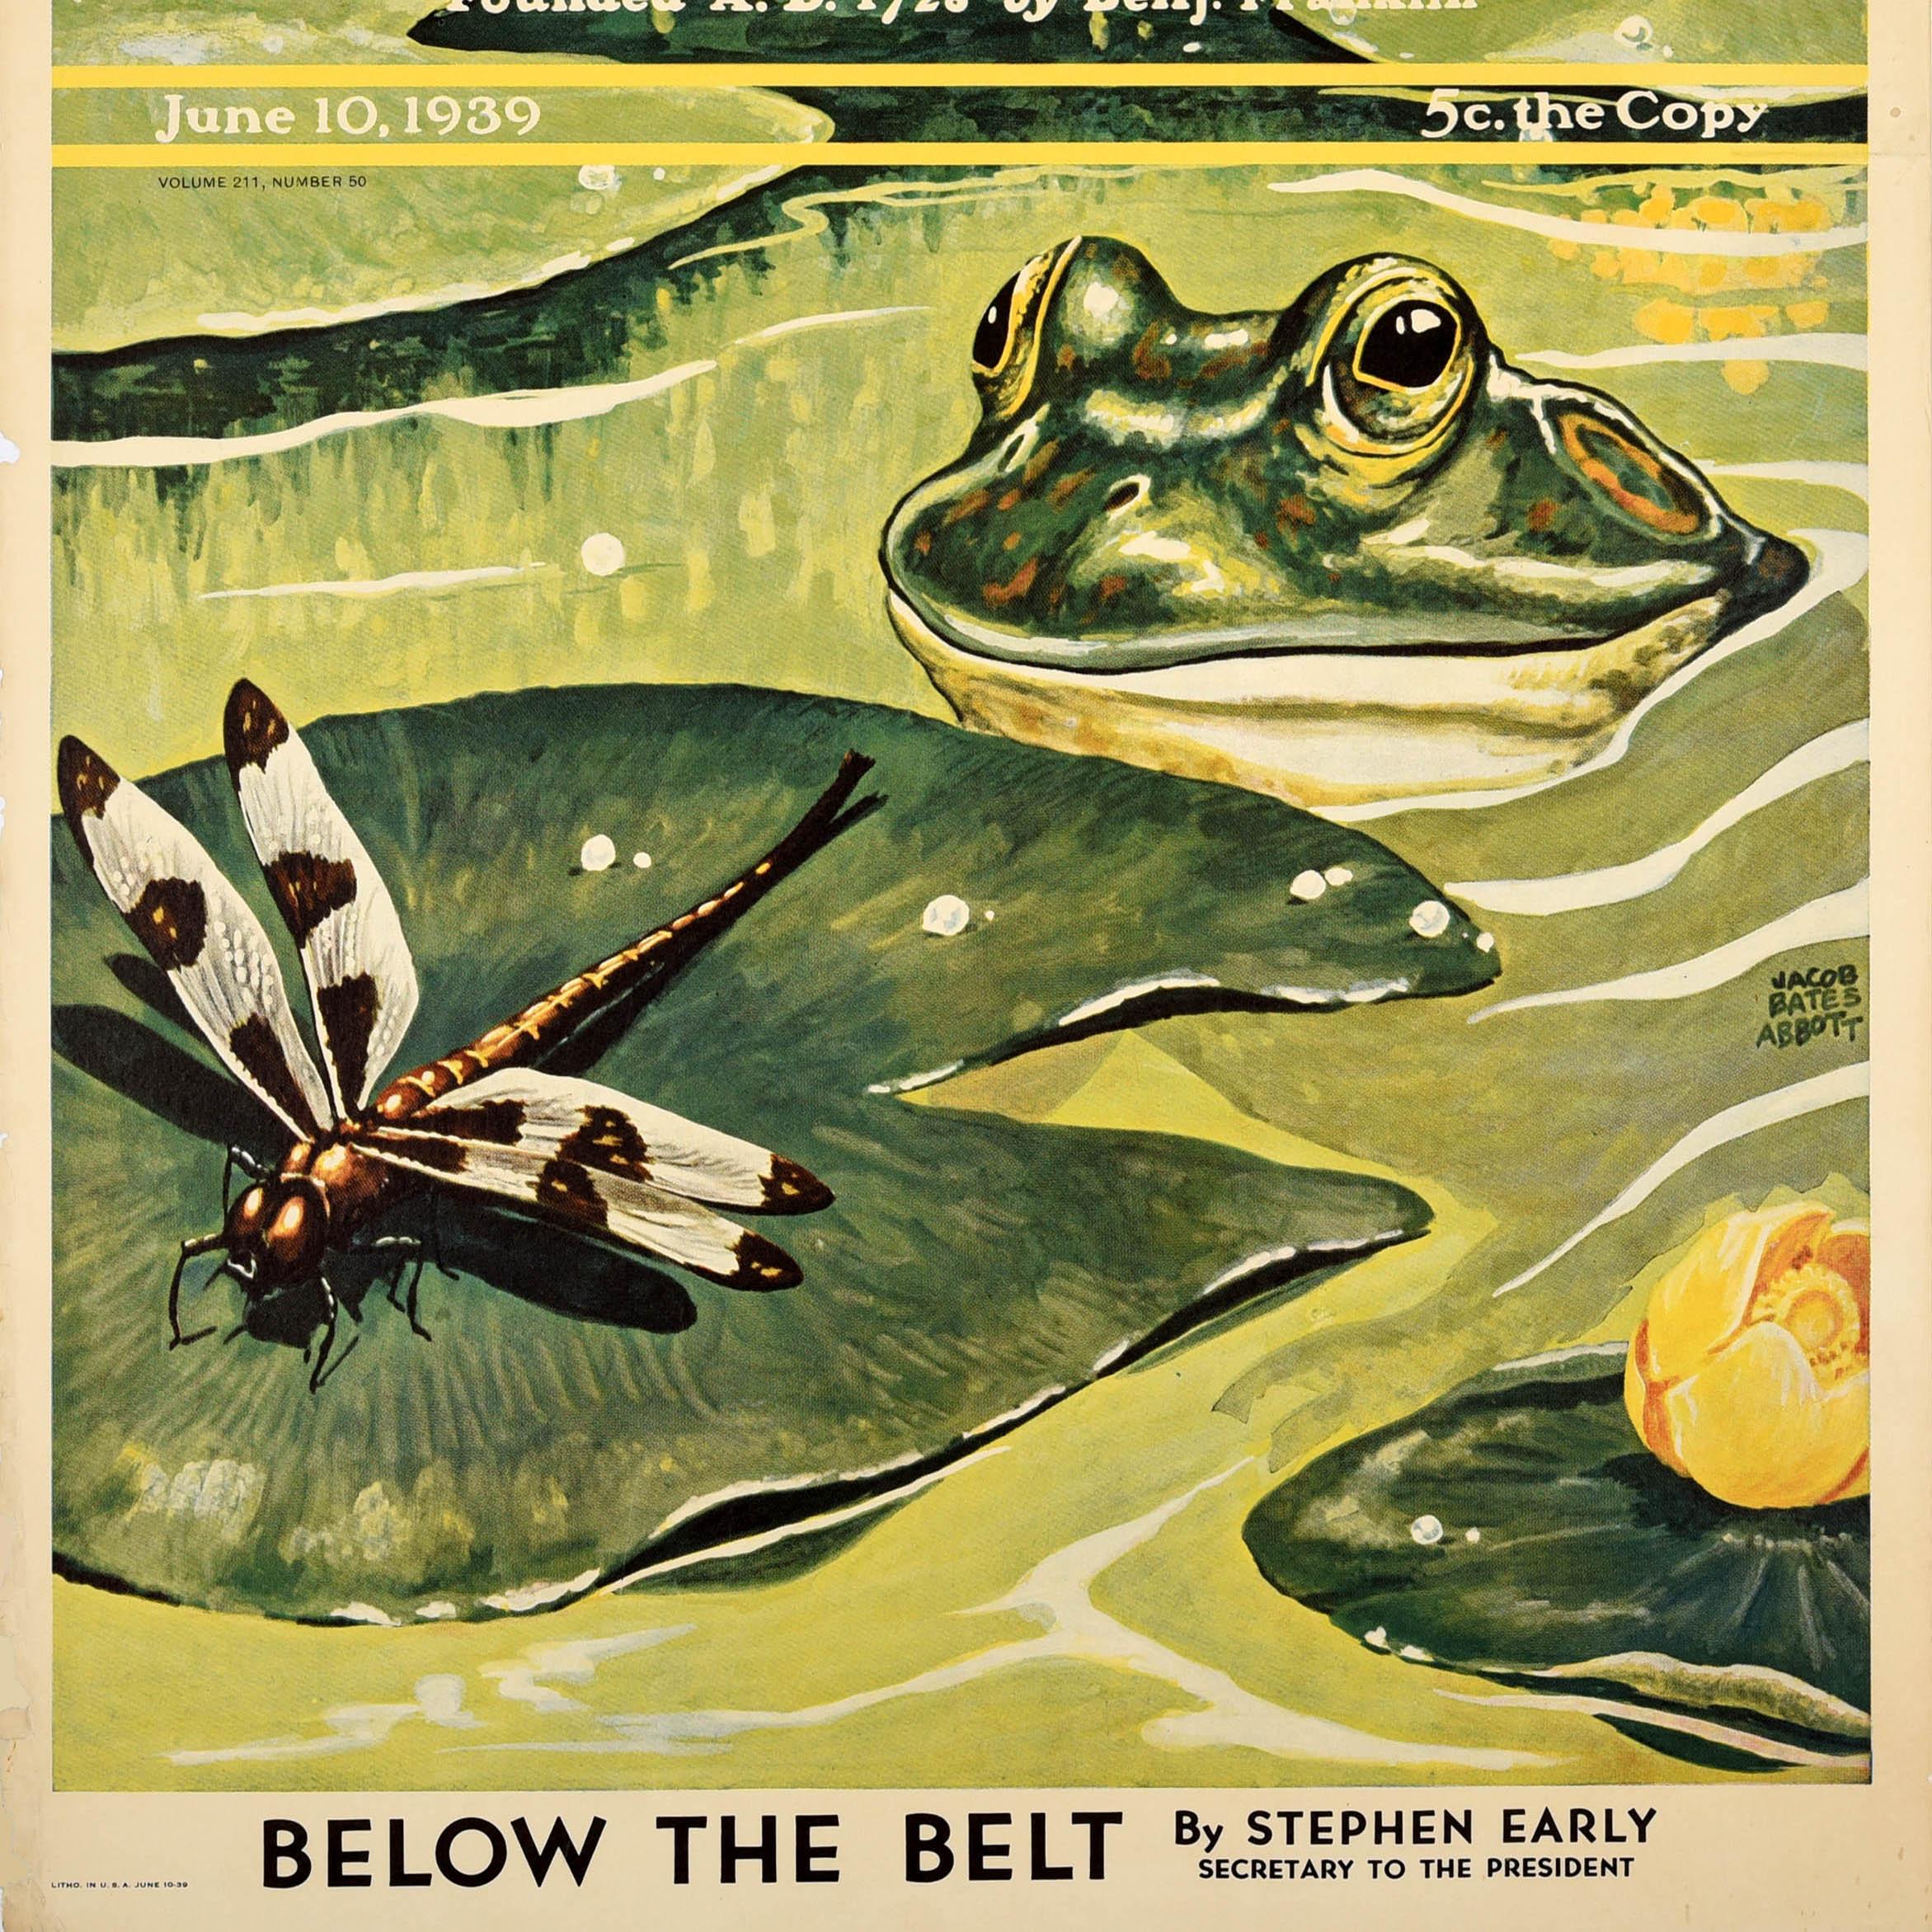 Original vintage advertising poster for The Saturday Evening Post magazine issue 10 June 1939 featuring wildlife artwork by the watercolour painter Jacob Bates Abbott (1895-1950) of a frog swimming in a pond and looking at a dragonfly on a lily pad